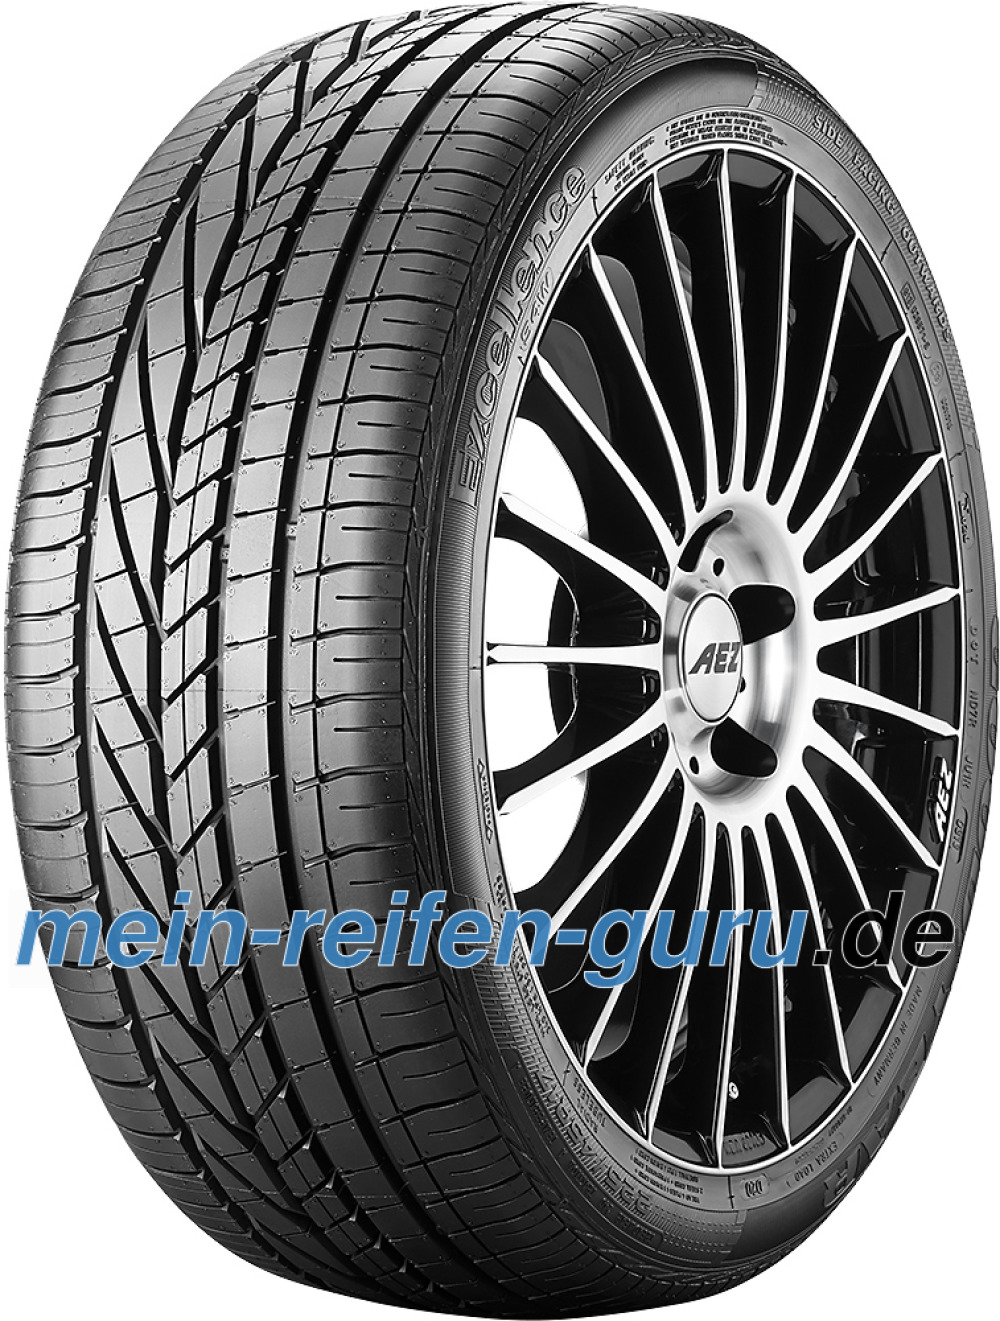 https://image.delti.com/tyre-pictures/1000/Brands/Goodyear/312/Profil_excellence_WM.jpg